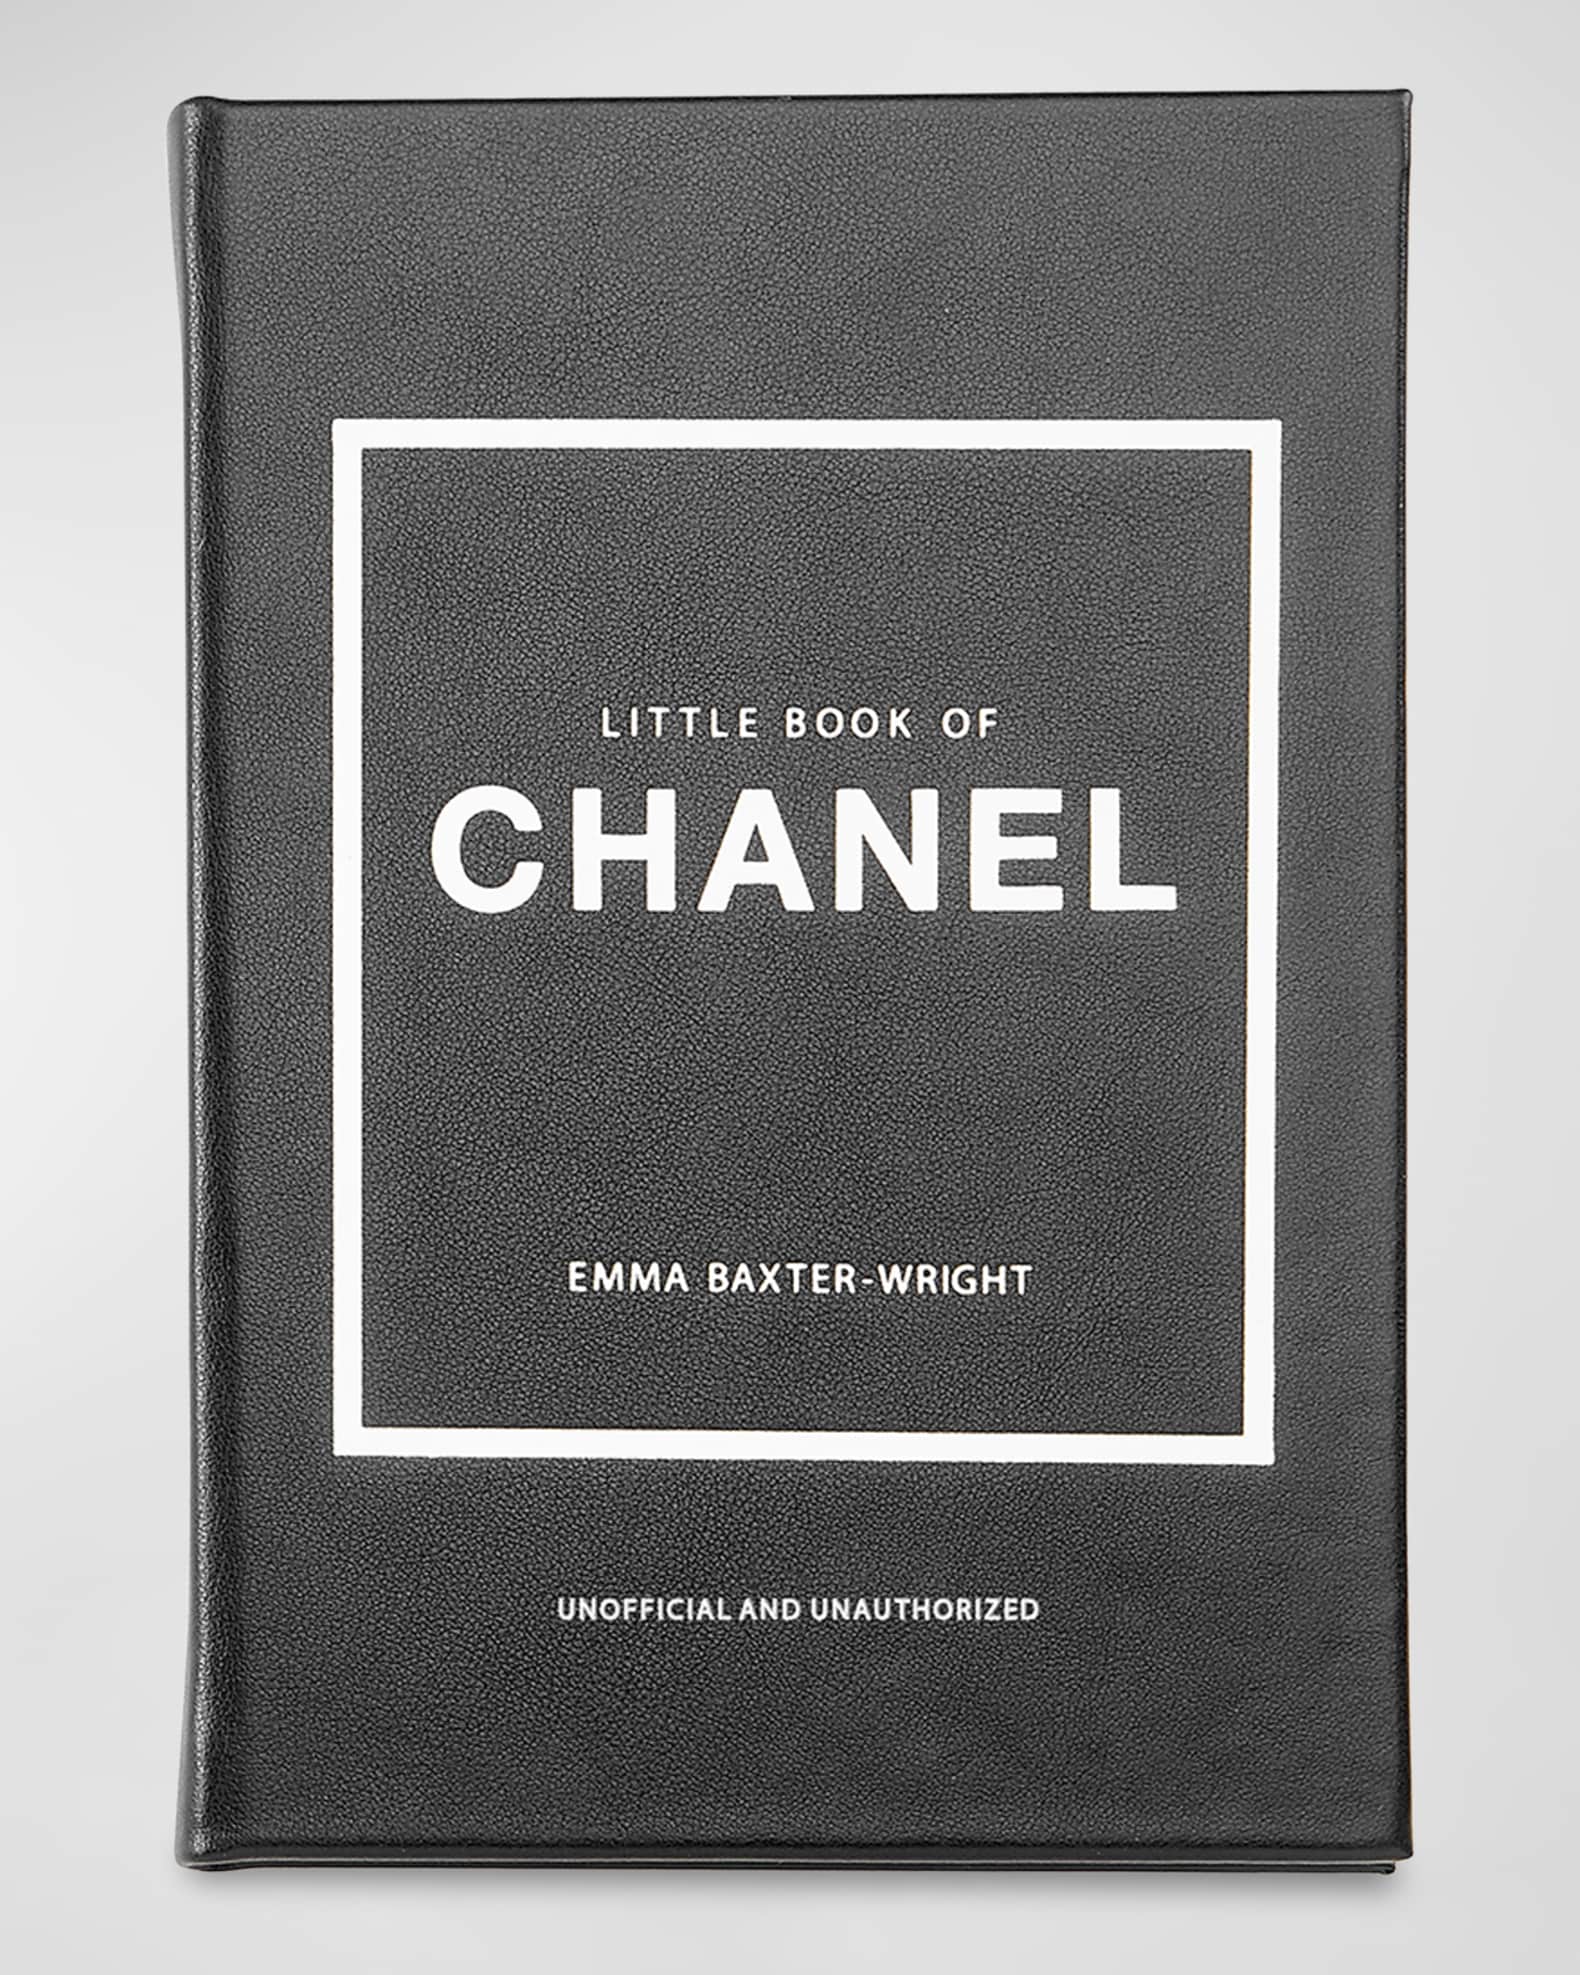 The Little Book of Chanel (Little Books of Fashion, 3): Baxter